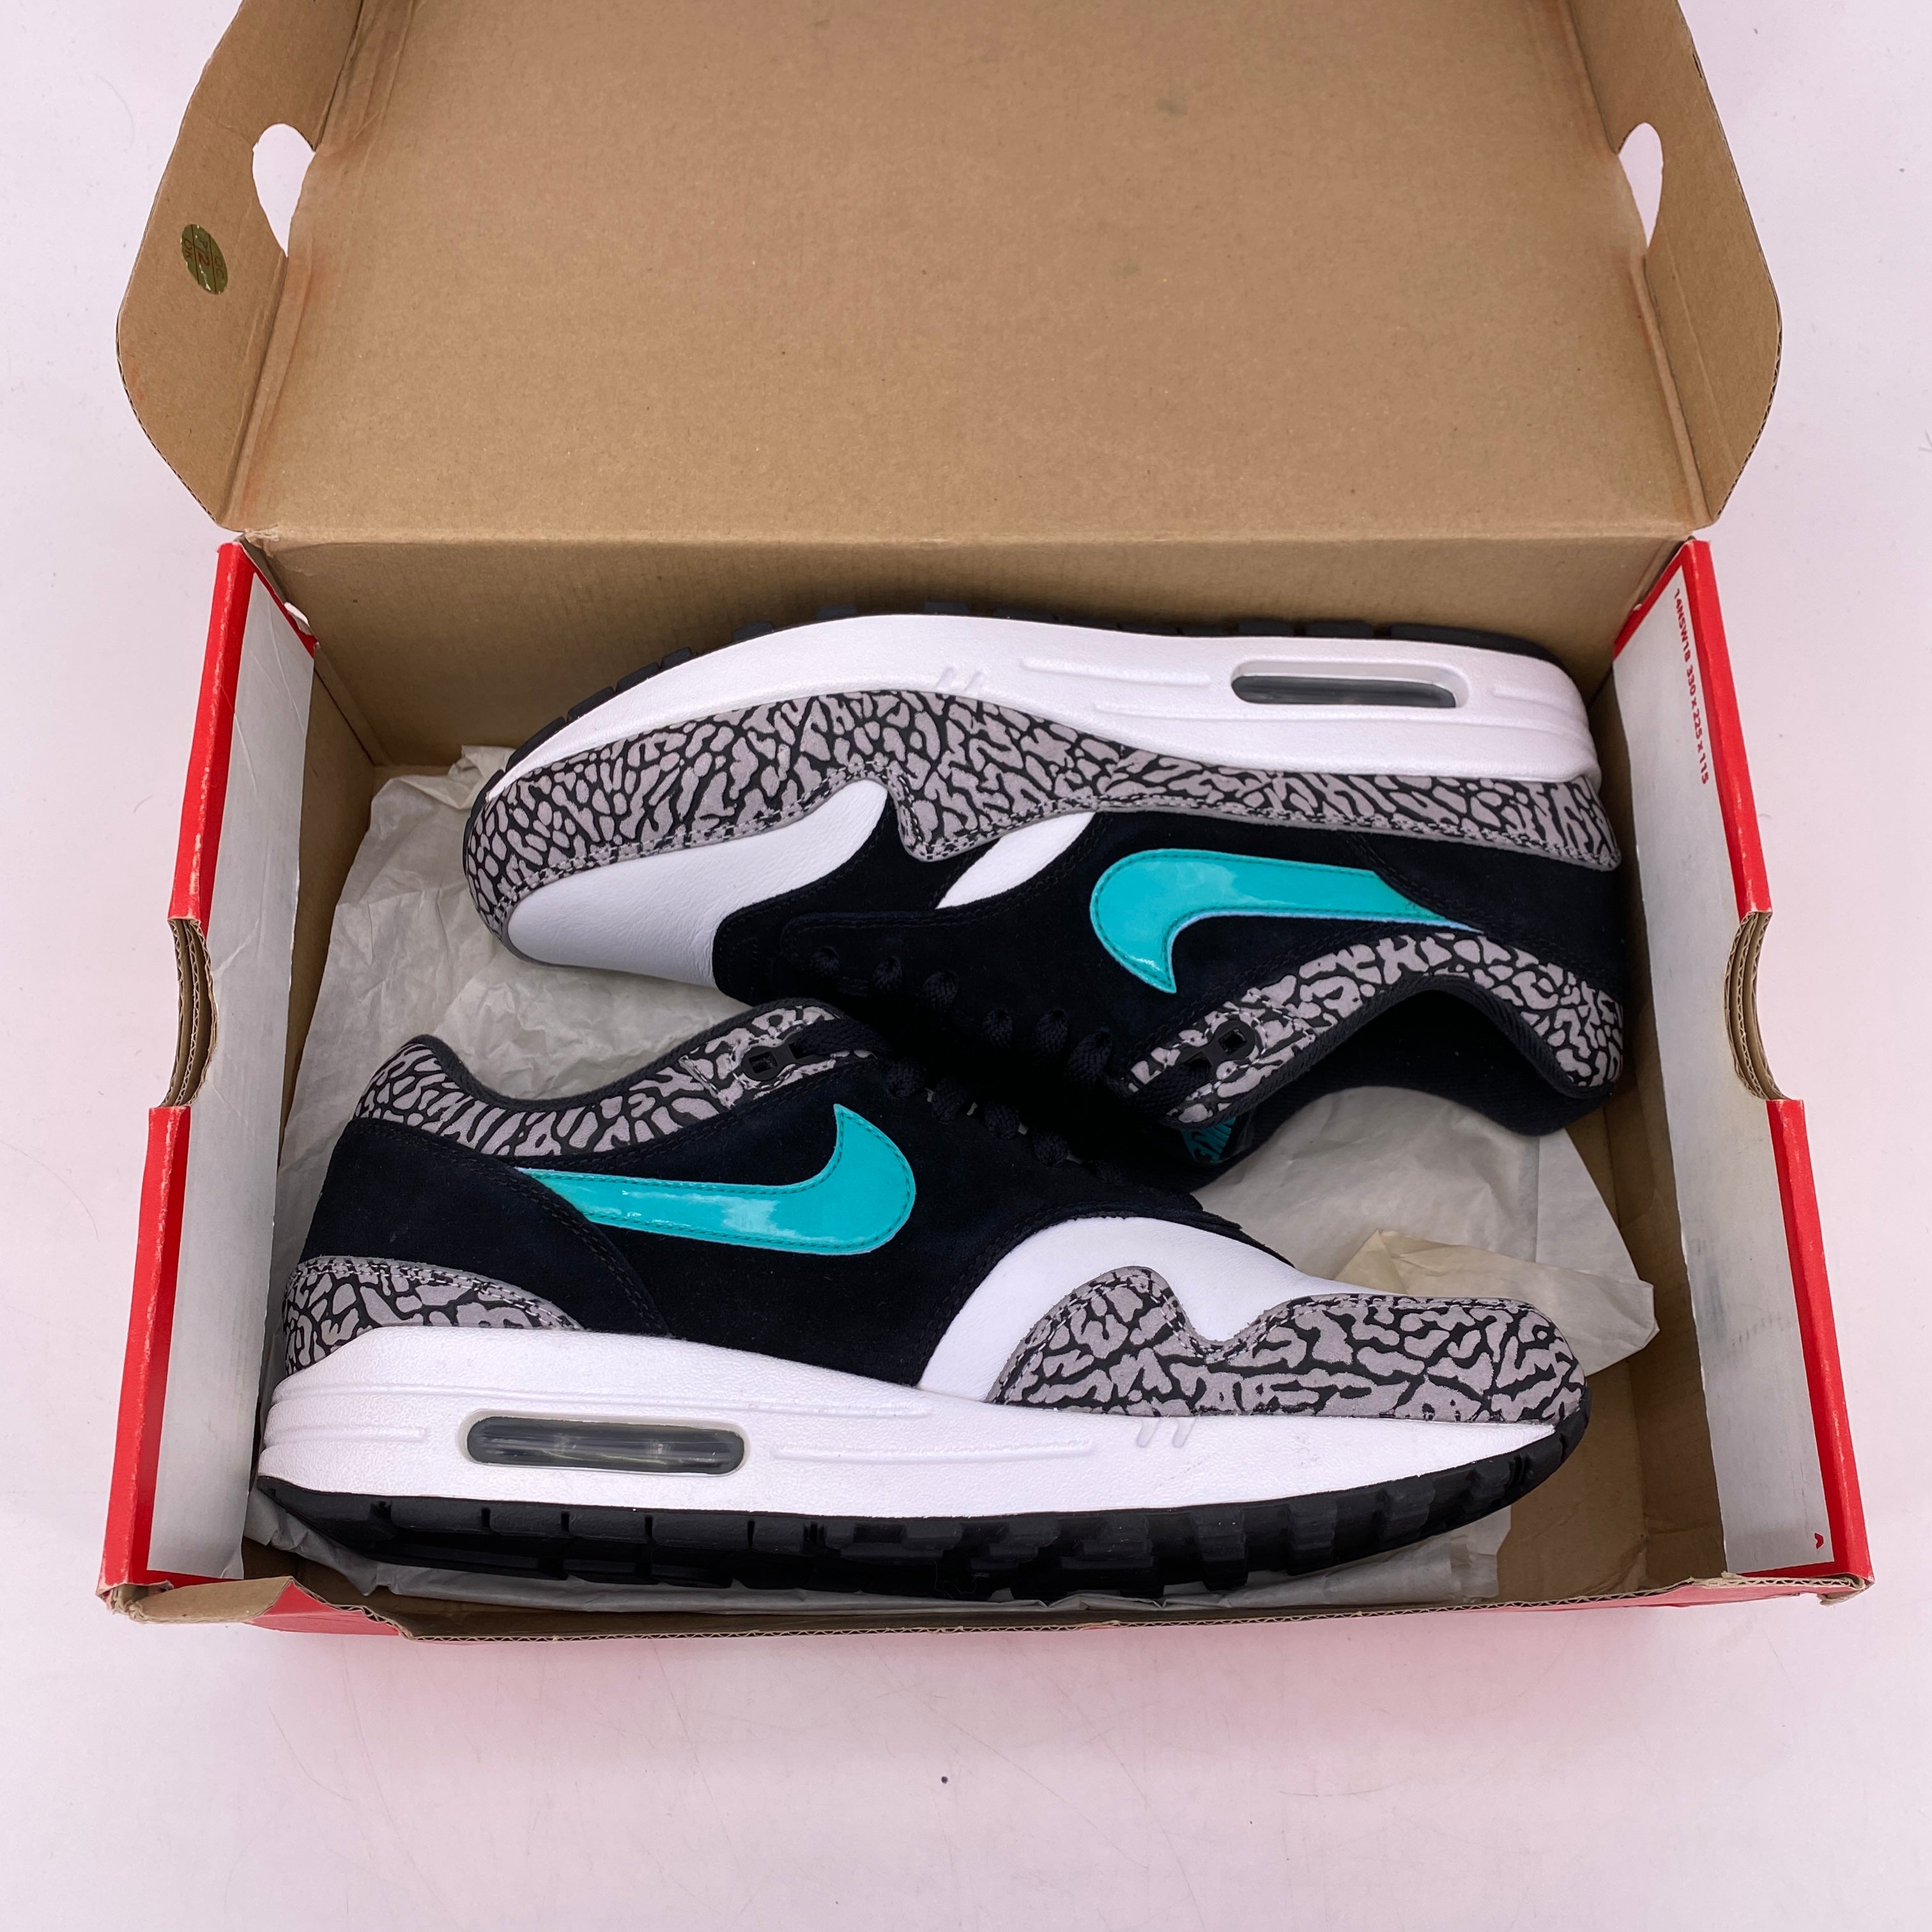 Nike Air Max 1 &quot;Atmos Elephant&quot; 2017 Used Size 9